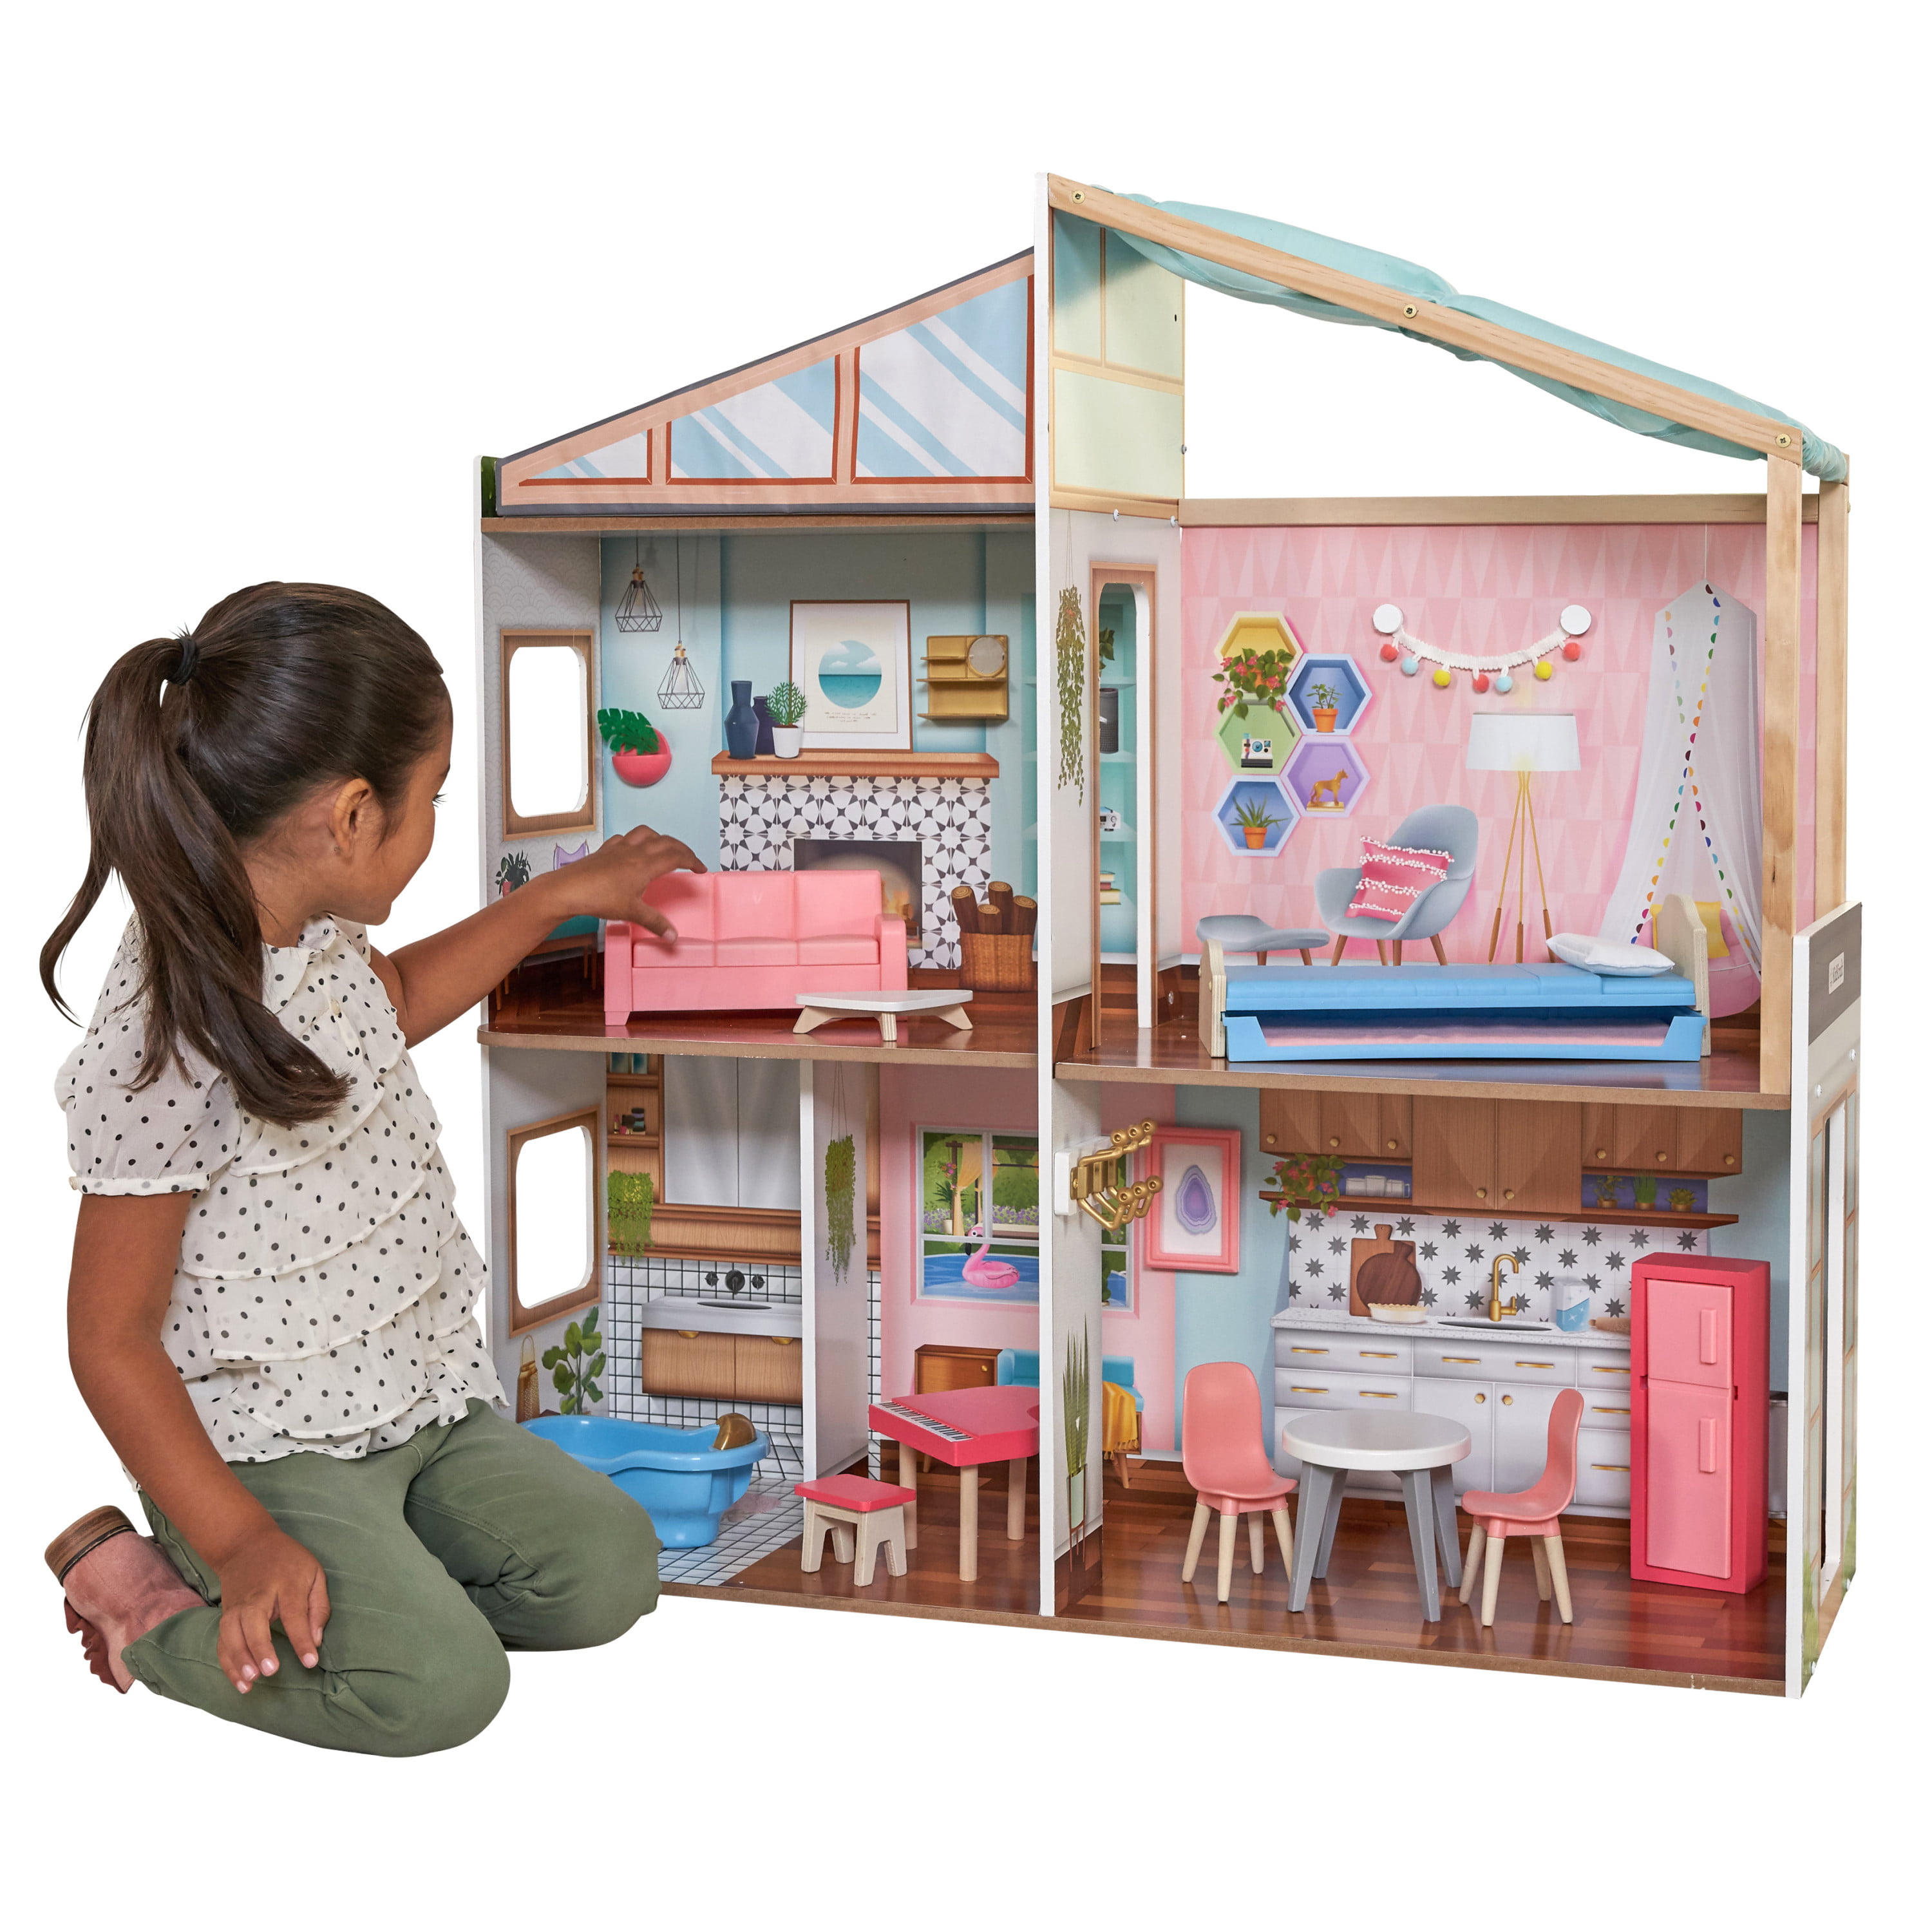 ROBUD Wooden Dollhouse for Girls with 15pcs Furniture 3.6ft Tall 3 